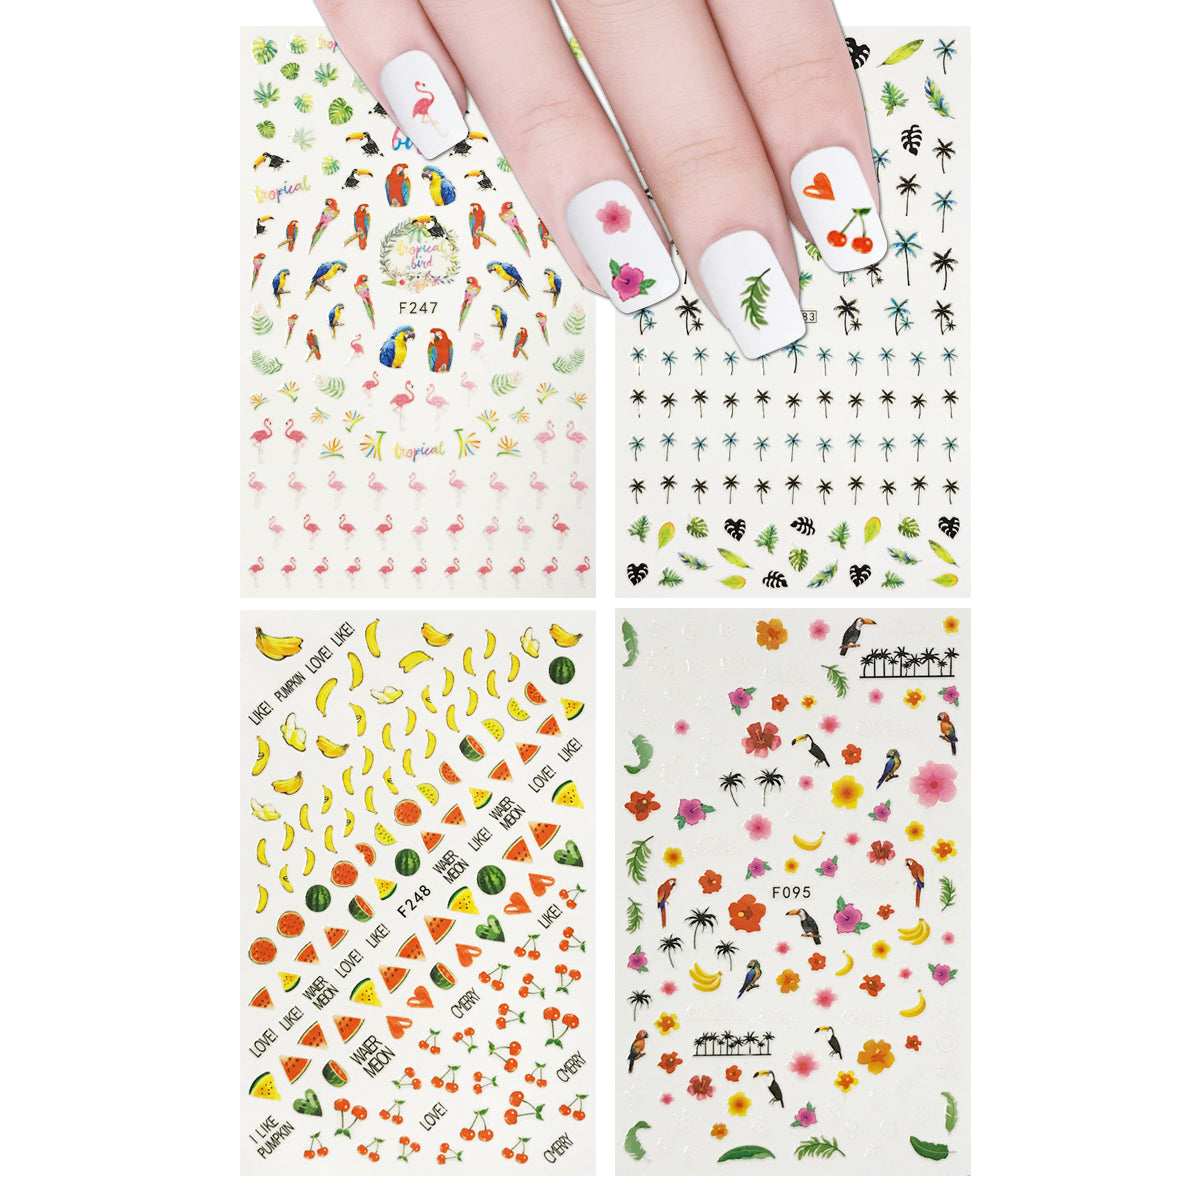 Nail Art Stickers Single Sheet - Life Changing Products